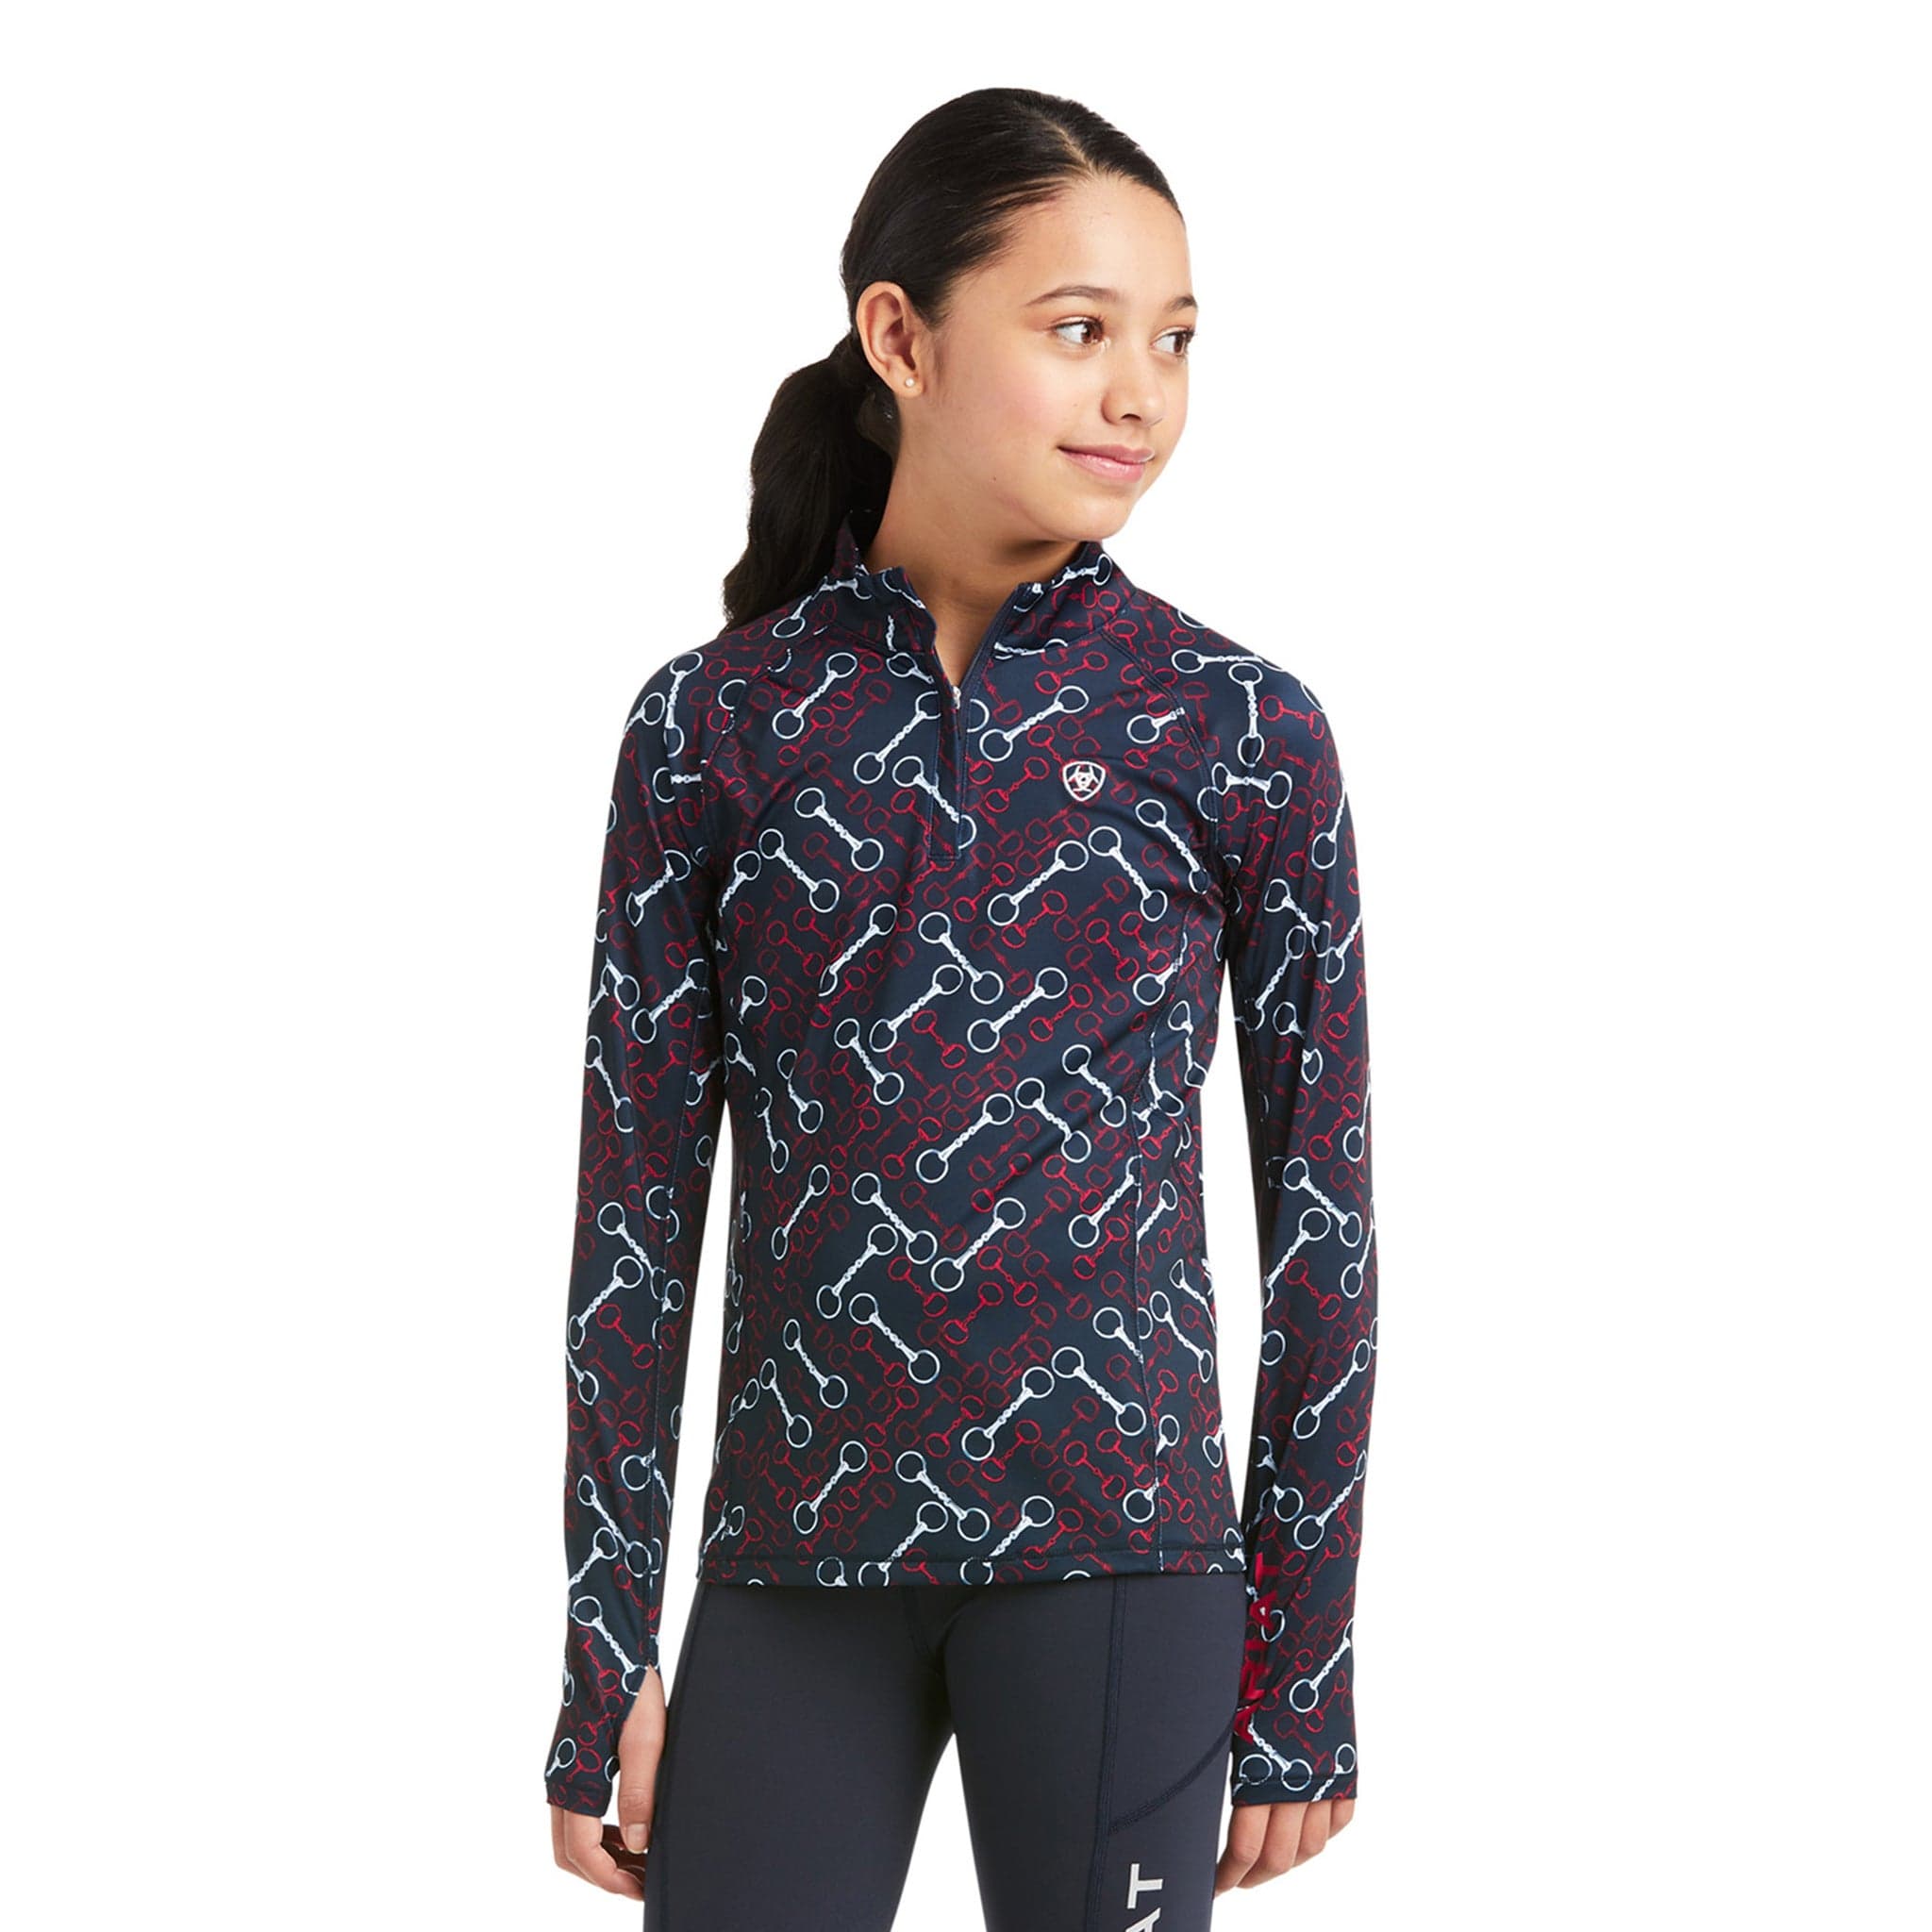 Ariat Youth Lowell 2.0 Quarter Zip Base Layer Team Print 10037460 Navy, Red and White Front On Model